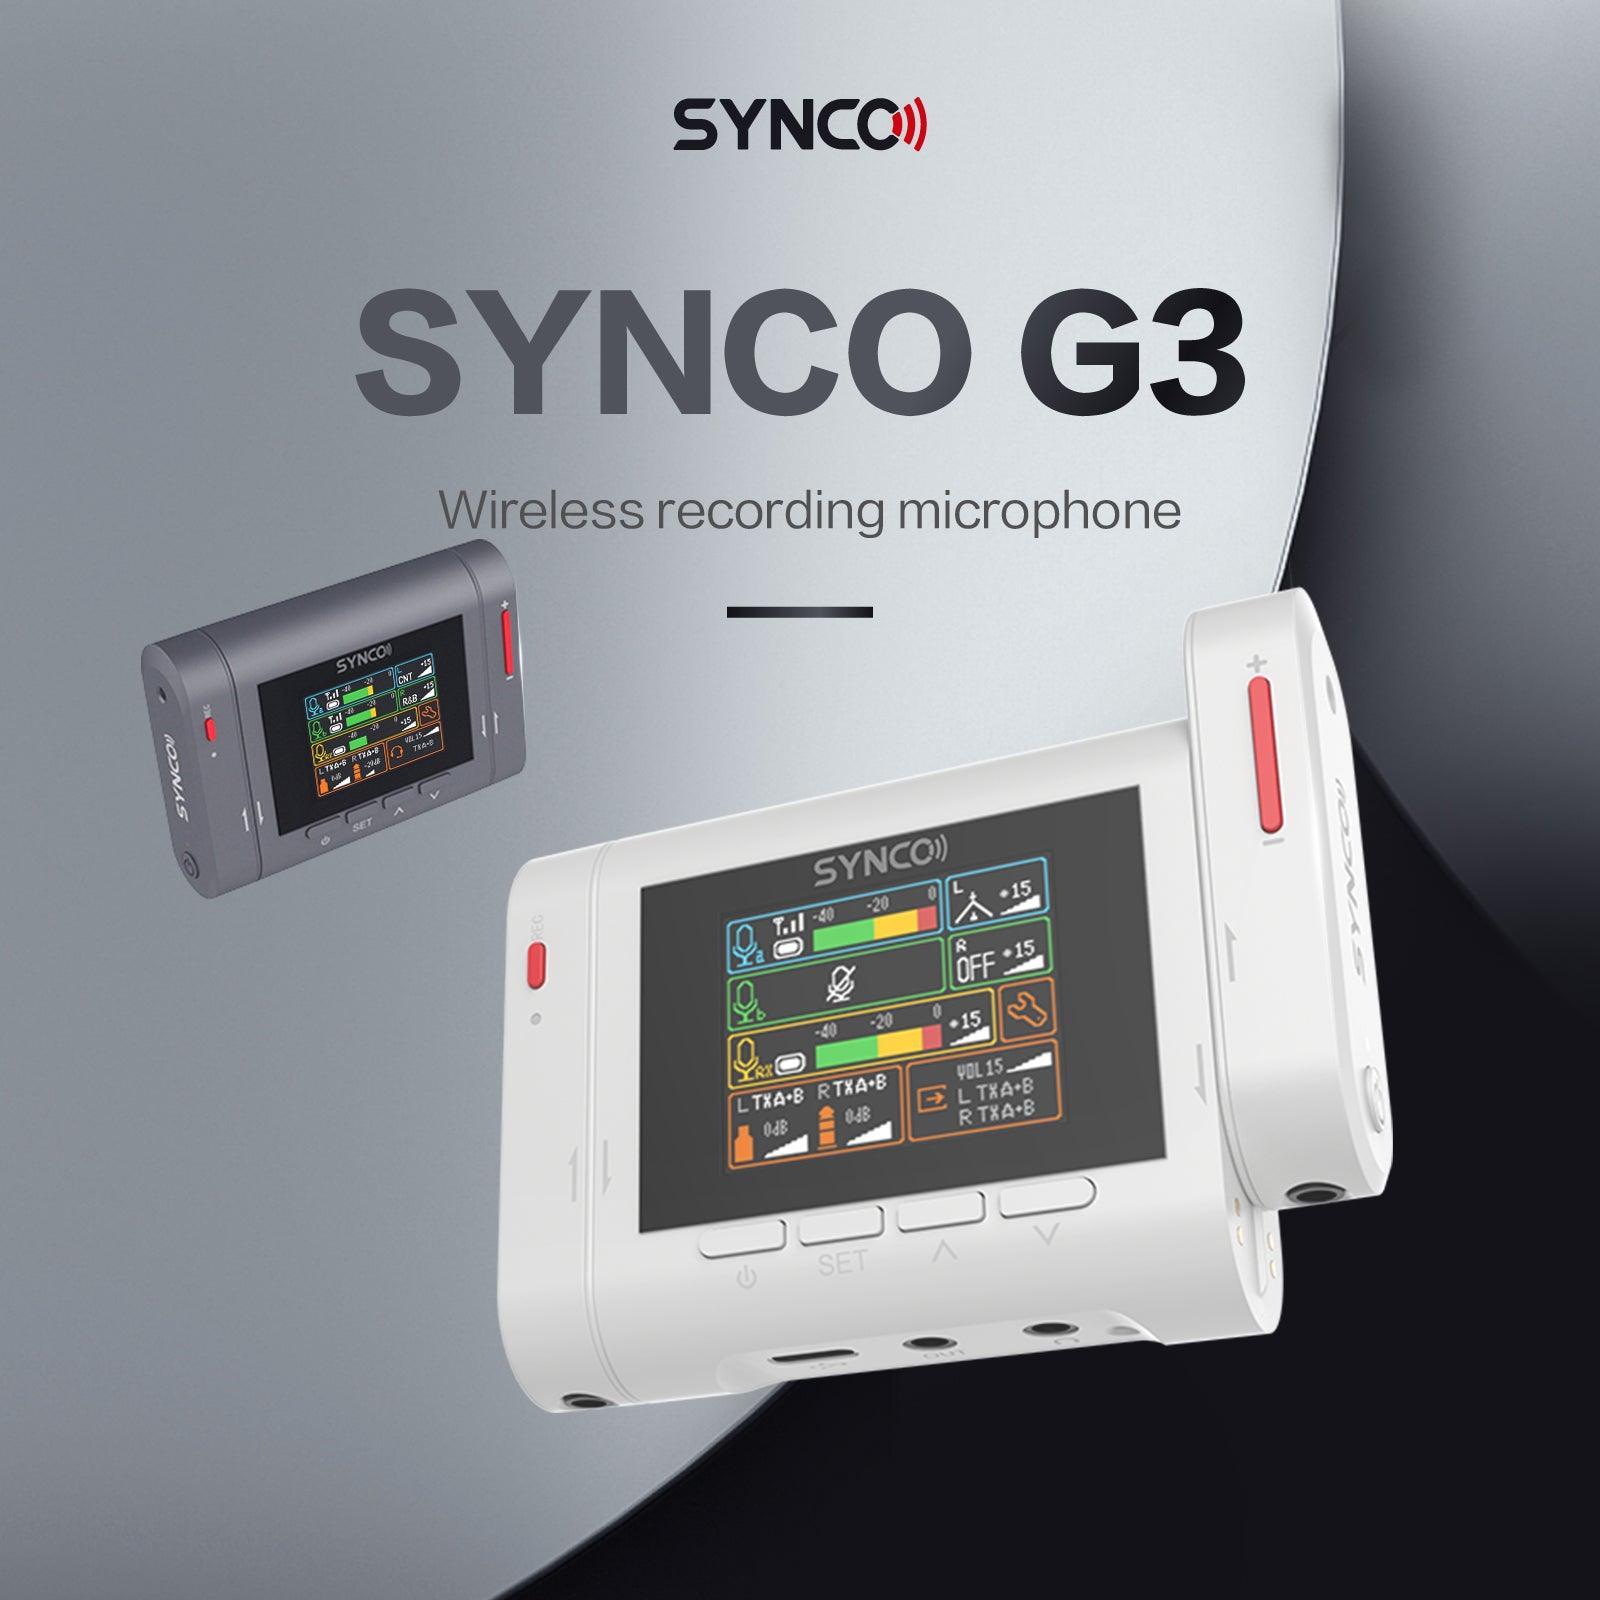 SYNCO G3 Wireless Recording Microphone